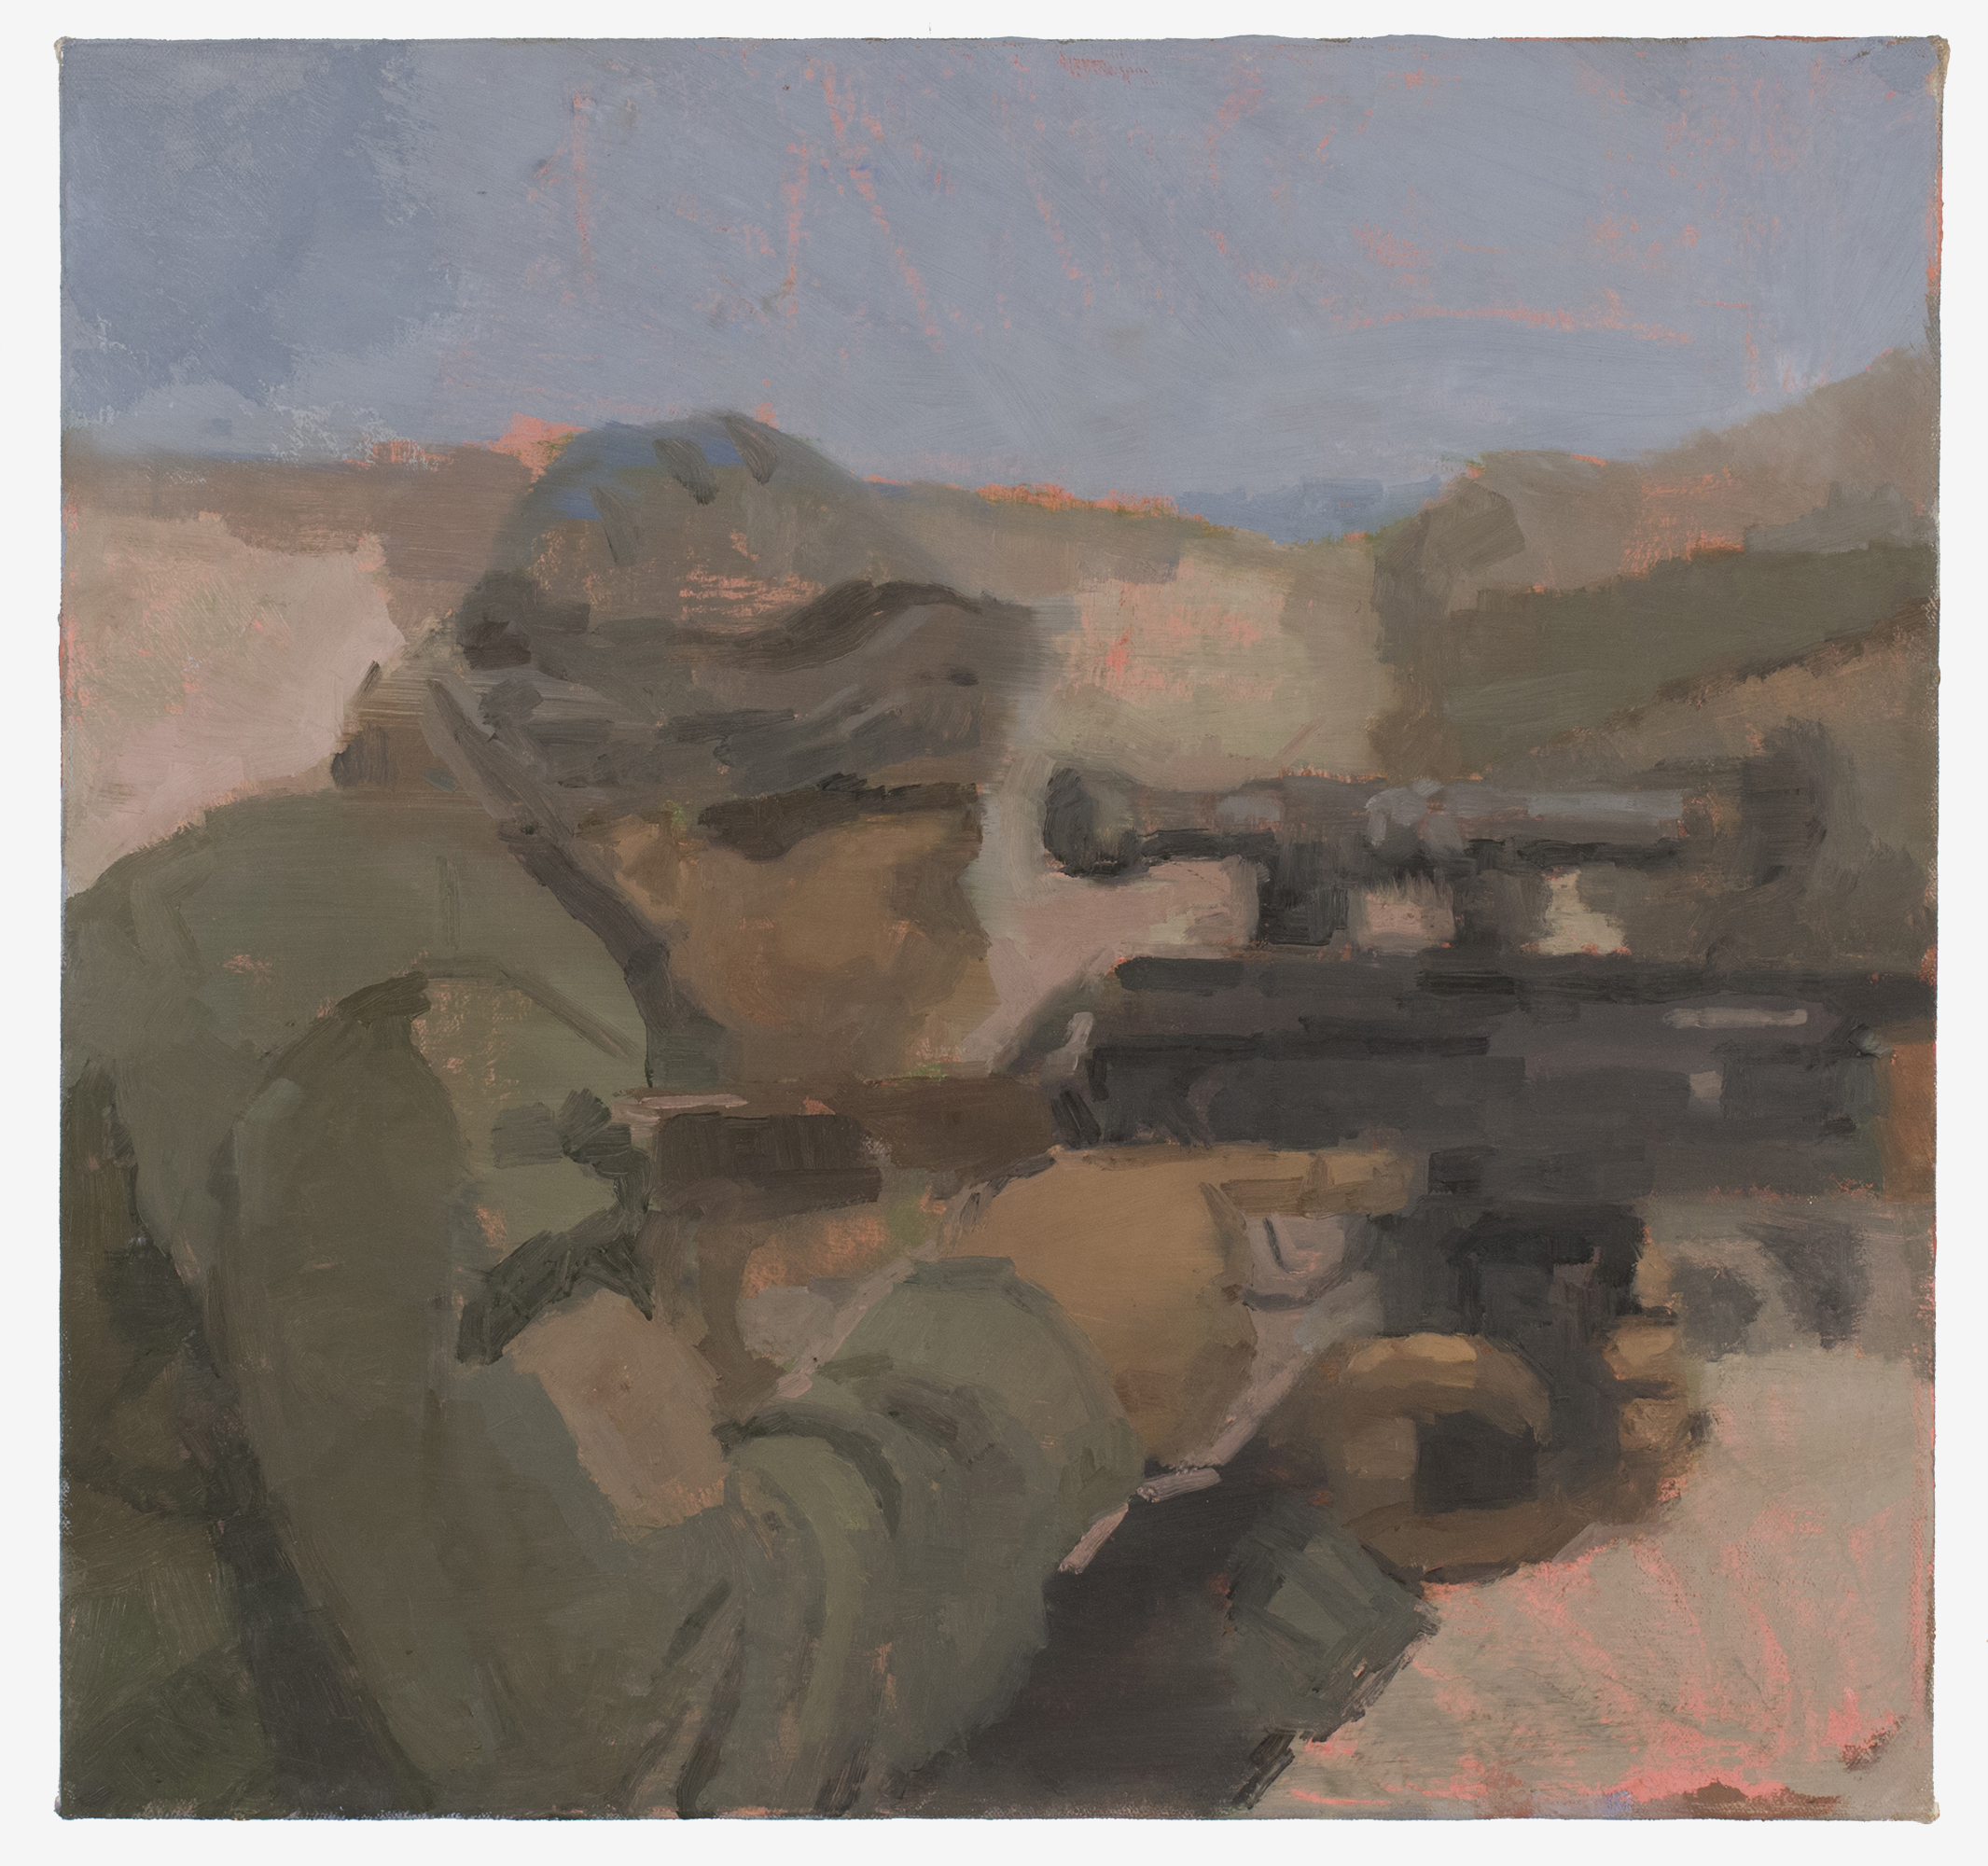 WAR STUDY 1 - 2021 - SIZE: 18 X 17 INCHES - OIL ON CANVAS